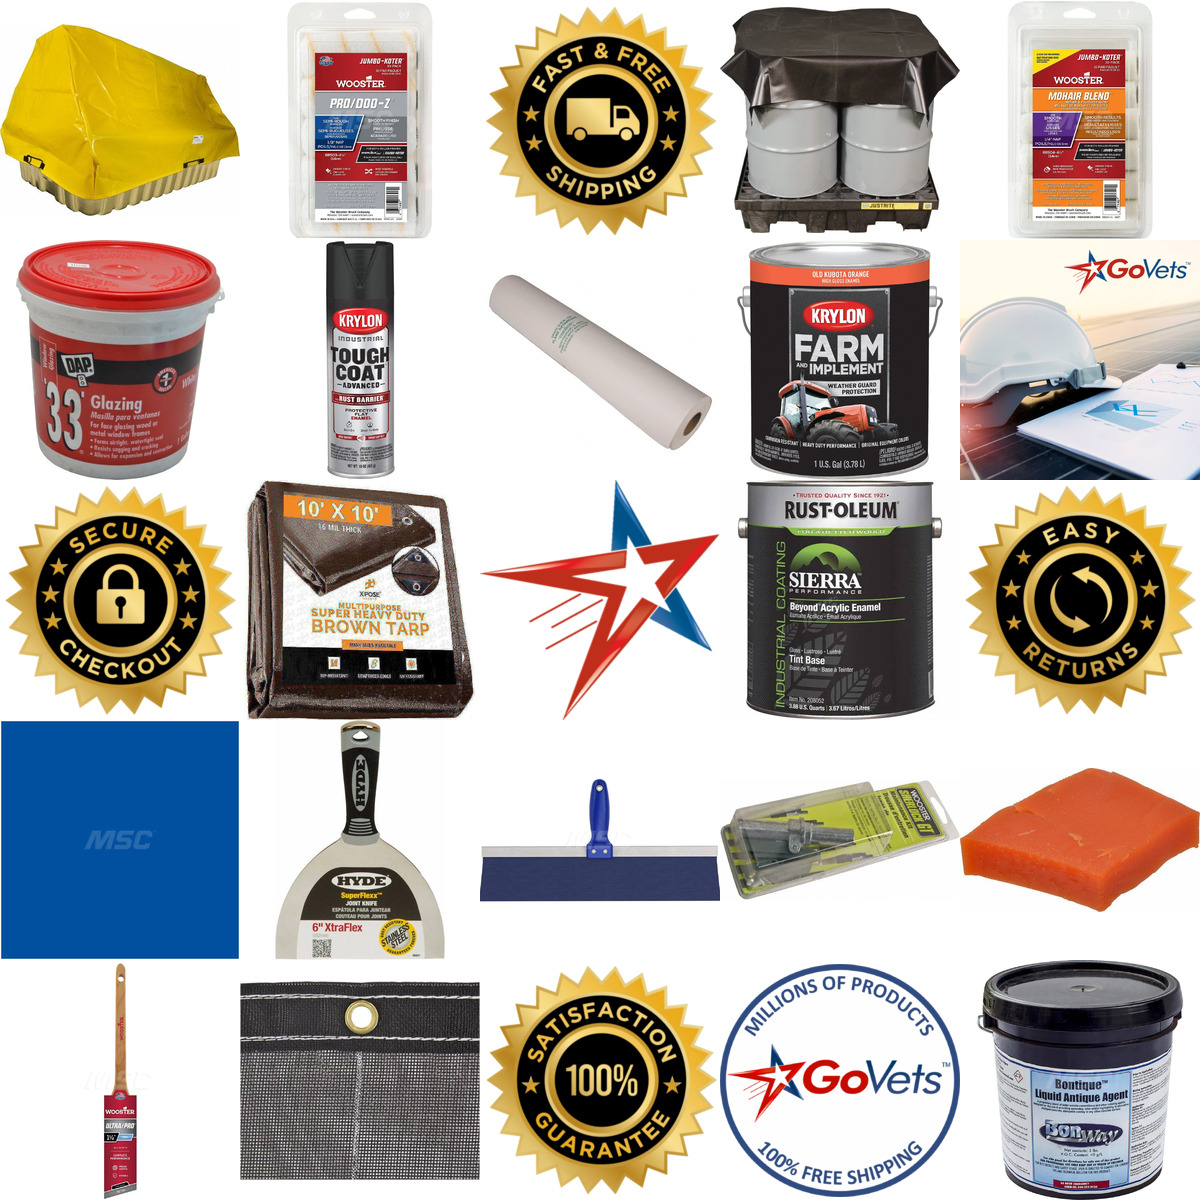 A selection of Paints Coatings and Surface Preparation products on GoVets